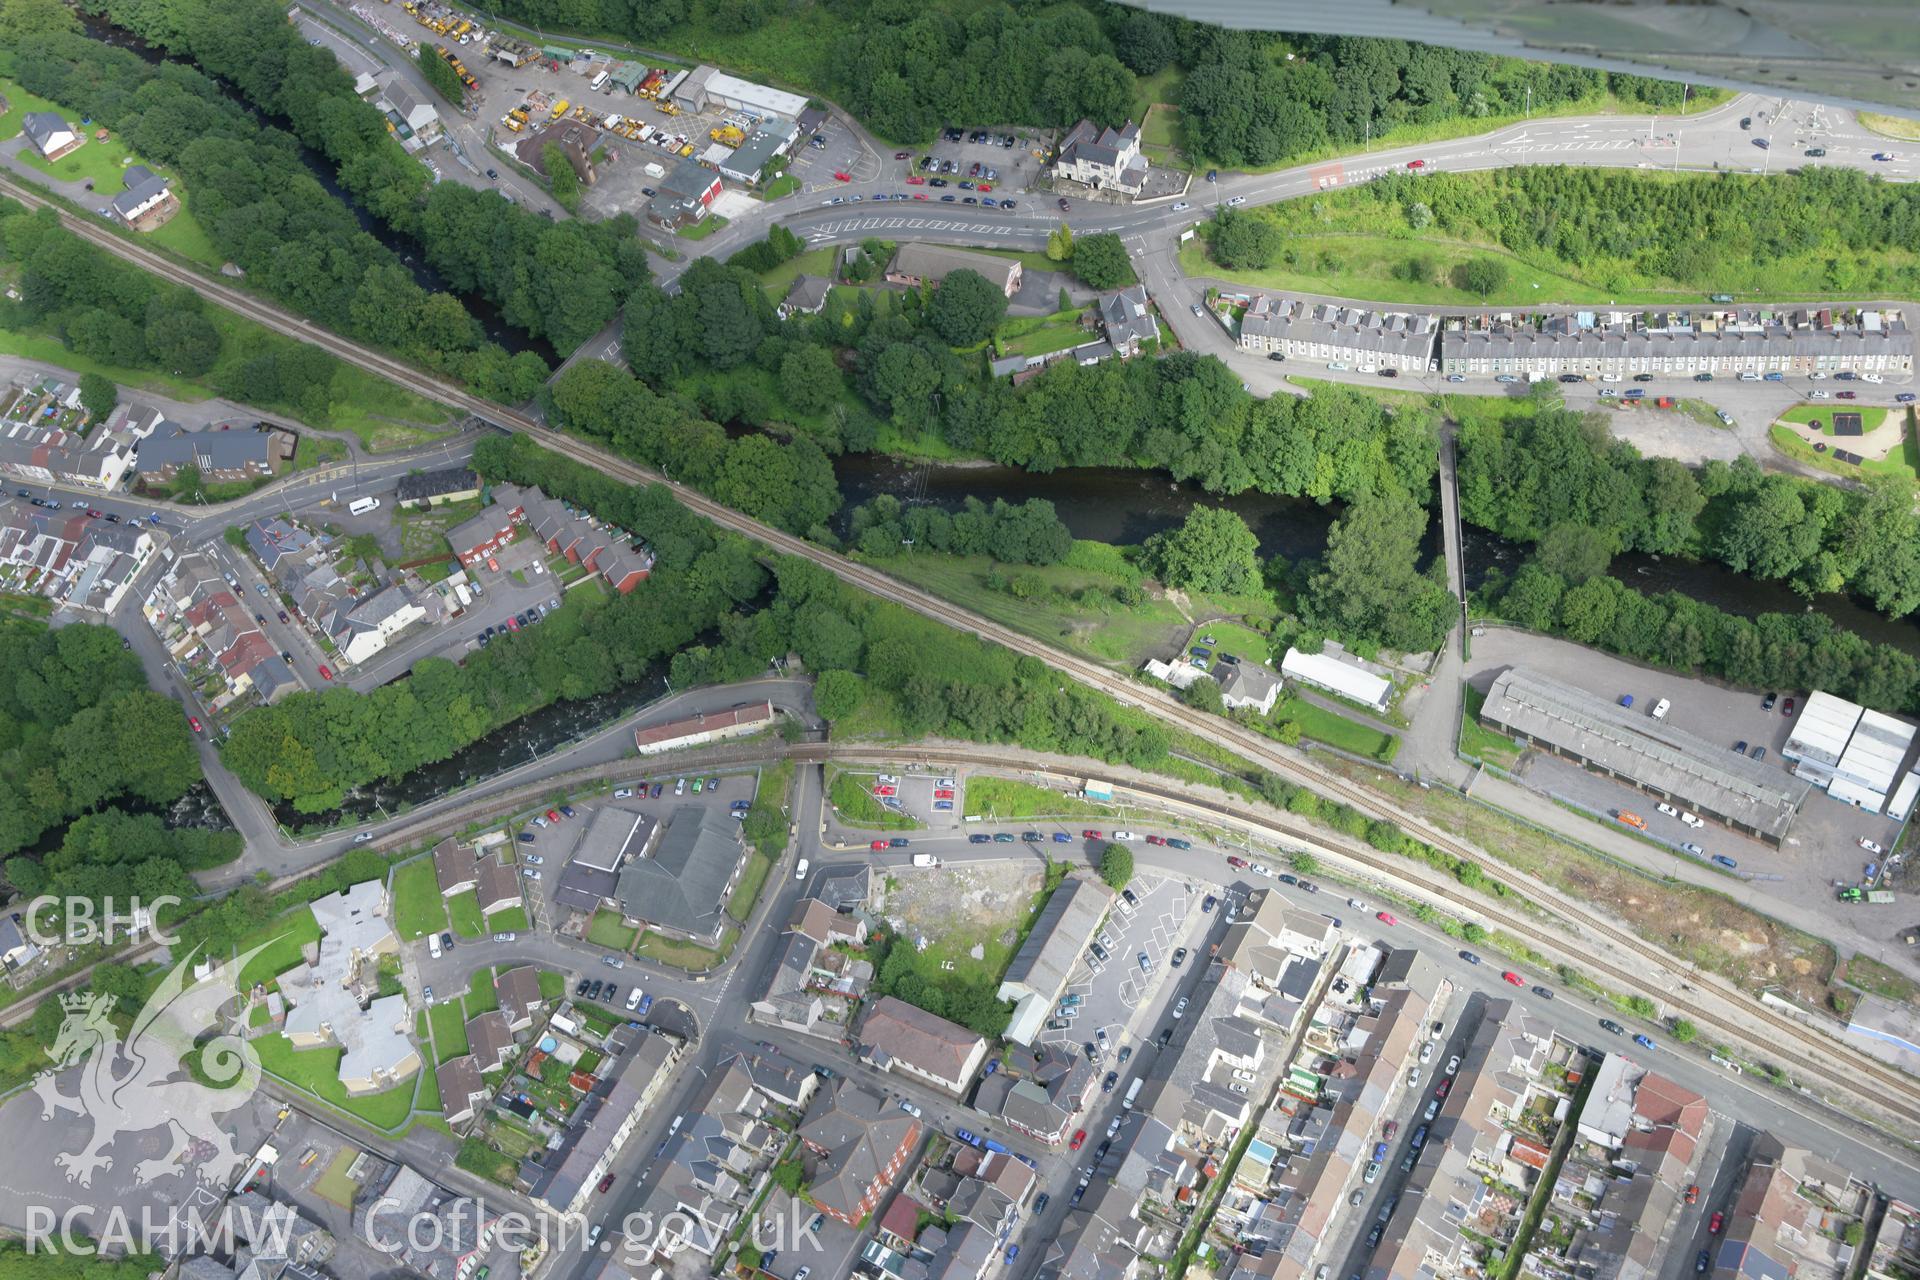 RCAHMW colour oblique aerial photograph of Cynon Star Aqueduct, Glamorganshire Canal, Abercynon. Taken on 30 July 2007 by Toby Driver